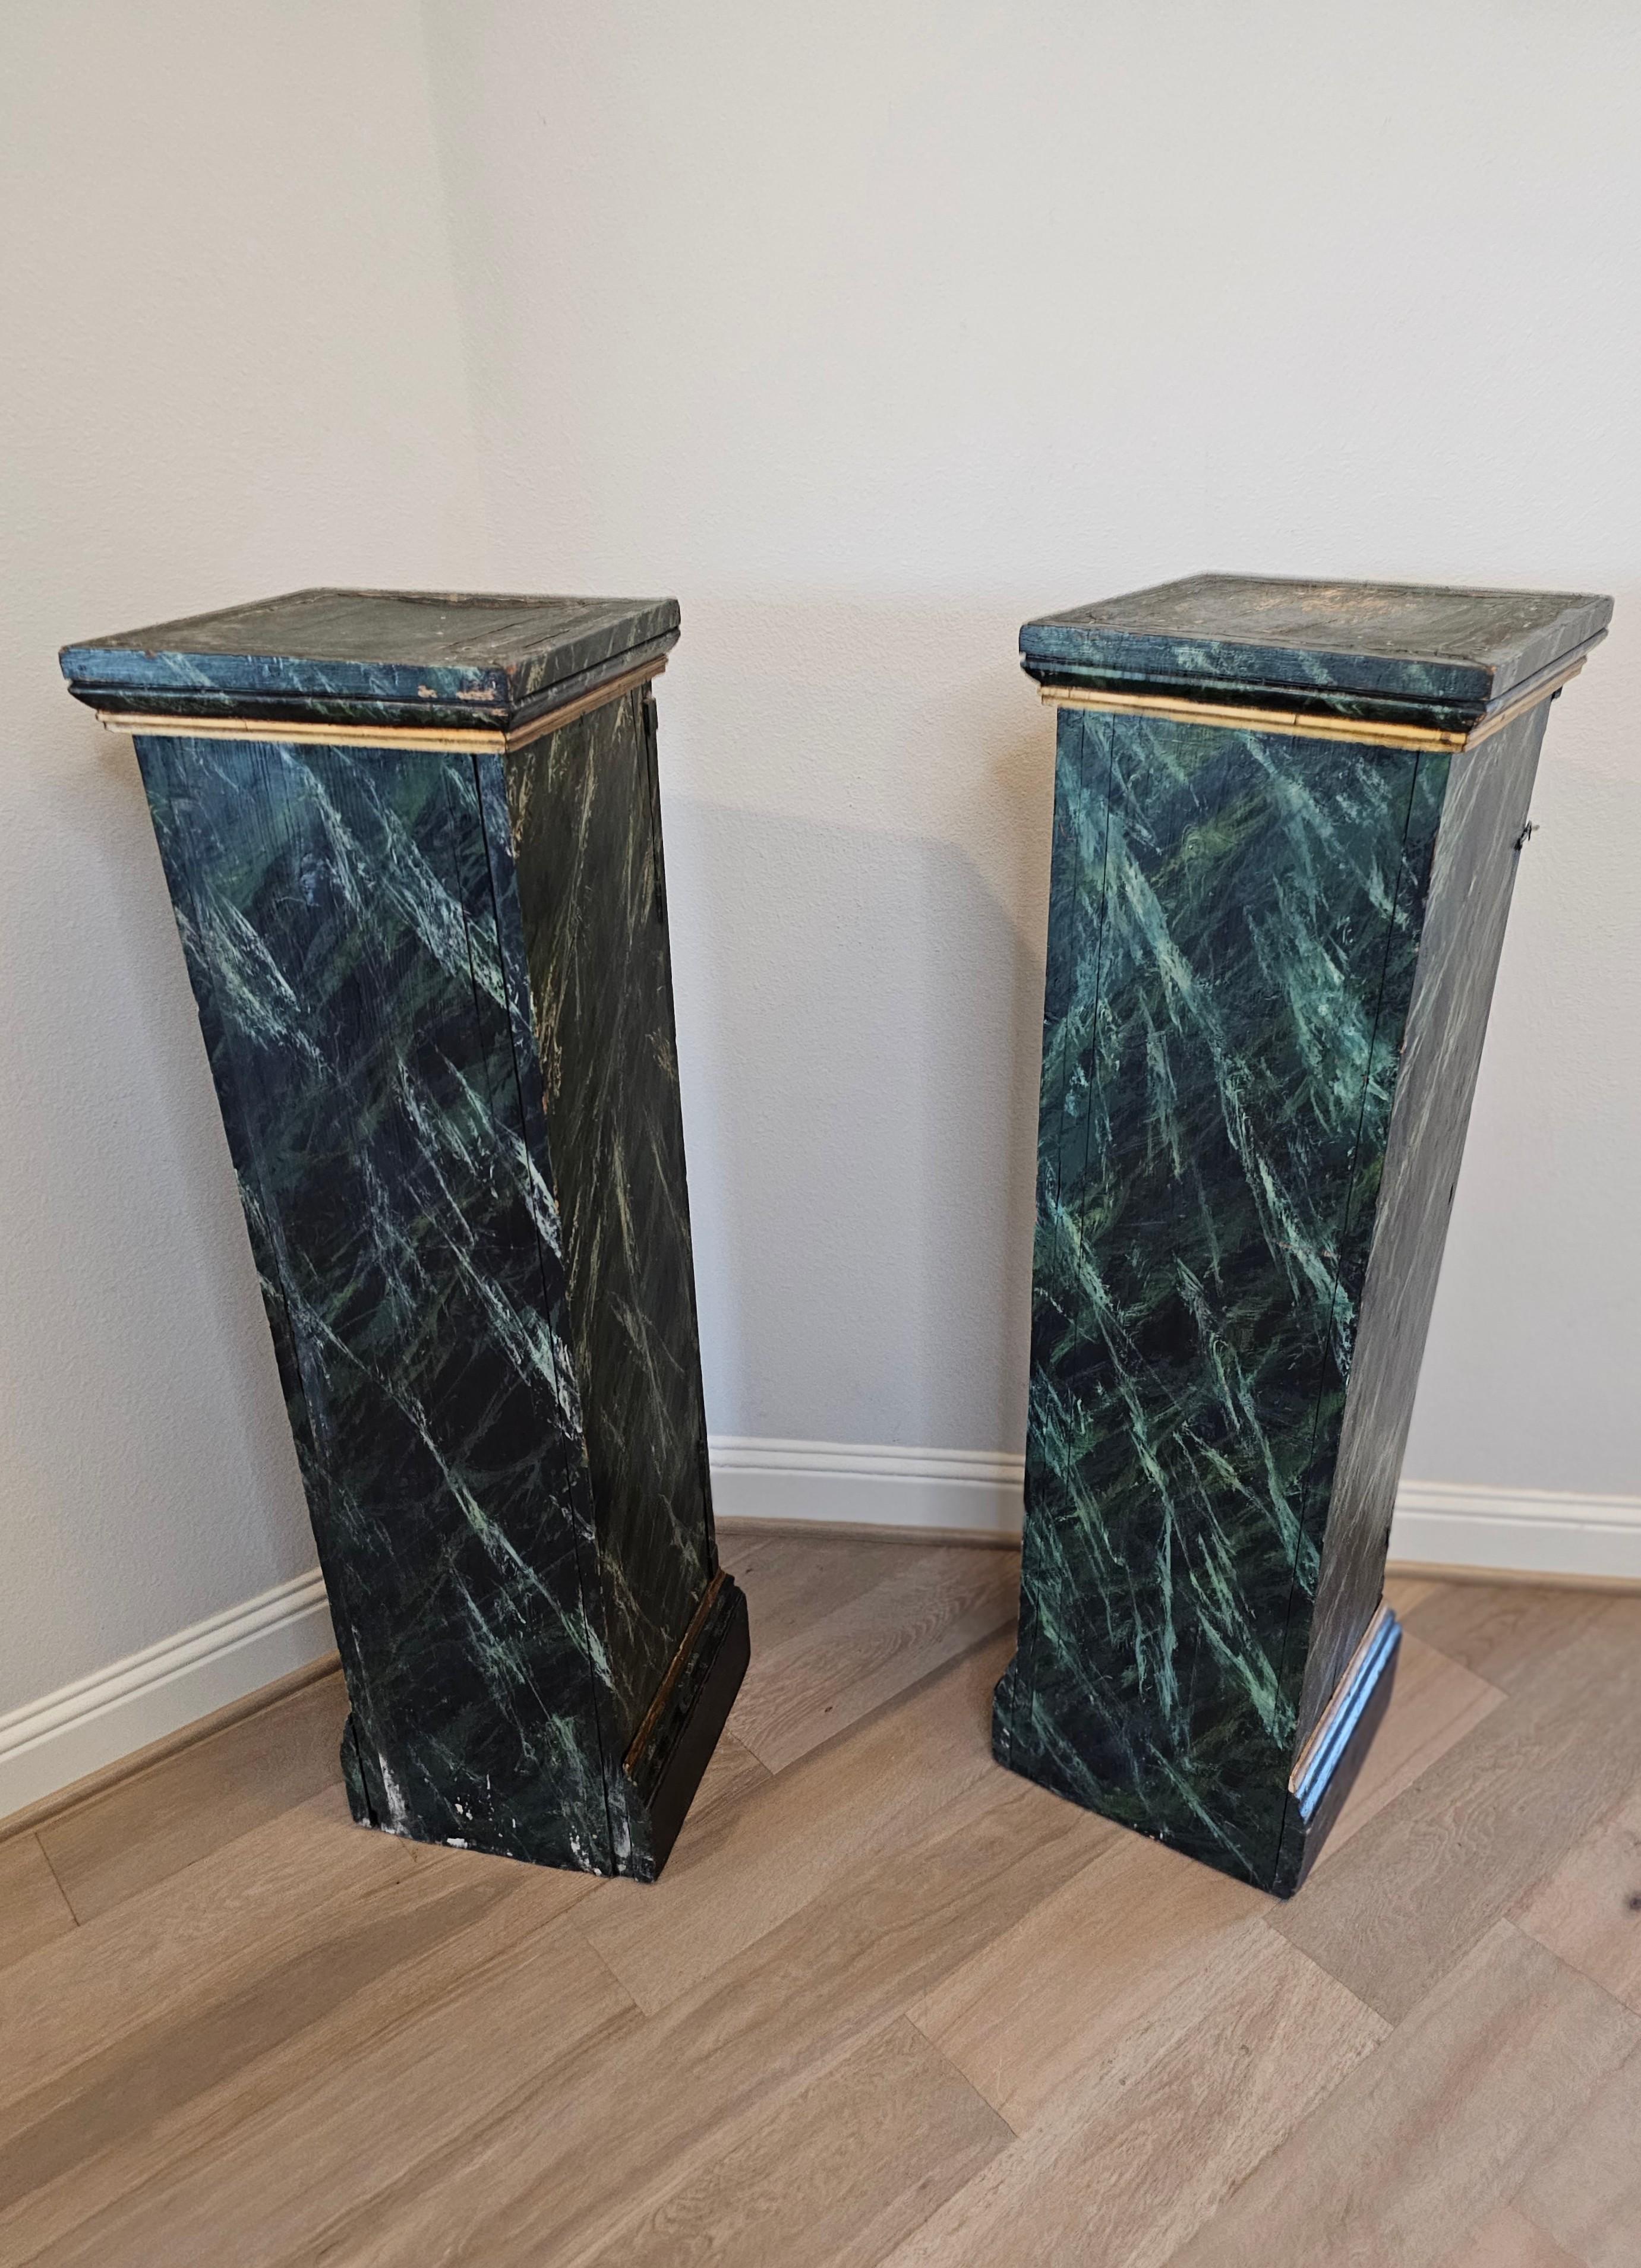 Antique Italian Neo-classical Marbleized Wood Pedestal Cabinet Stand Pair For Sale 6